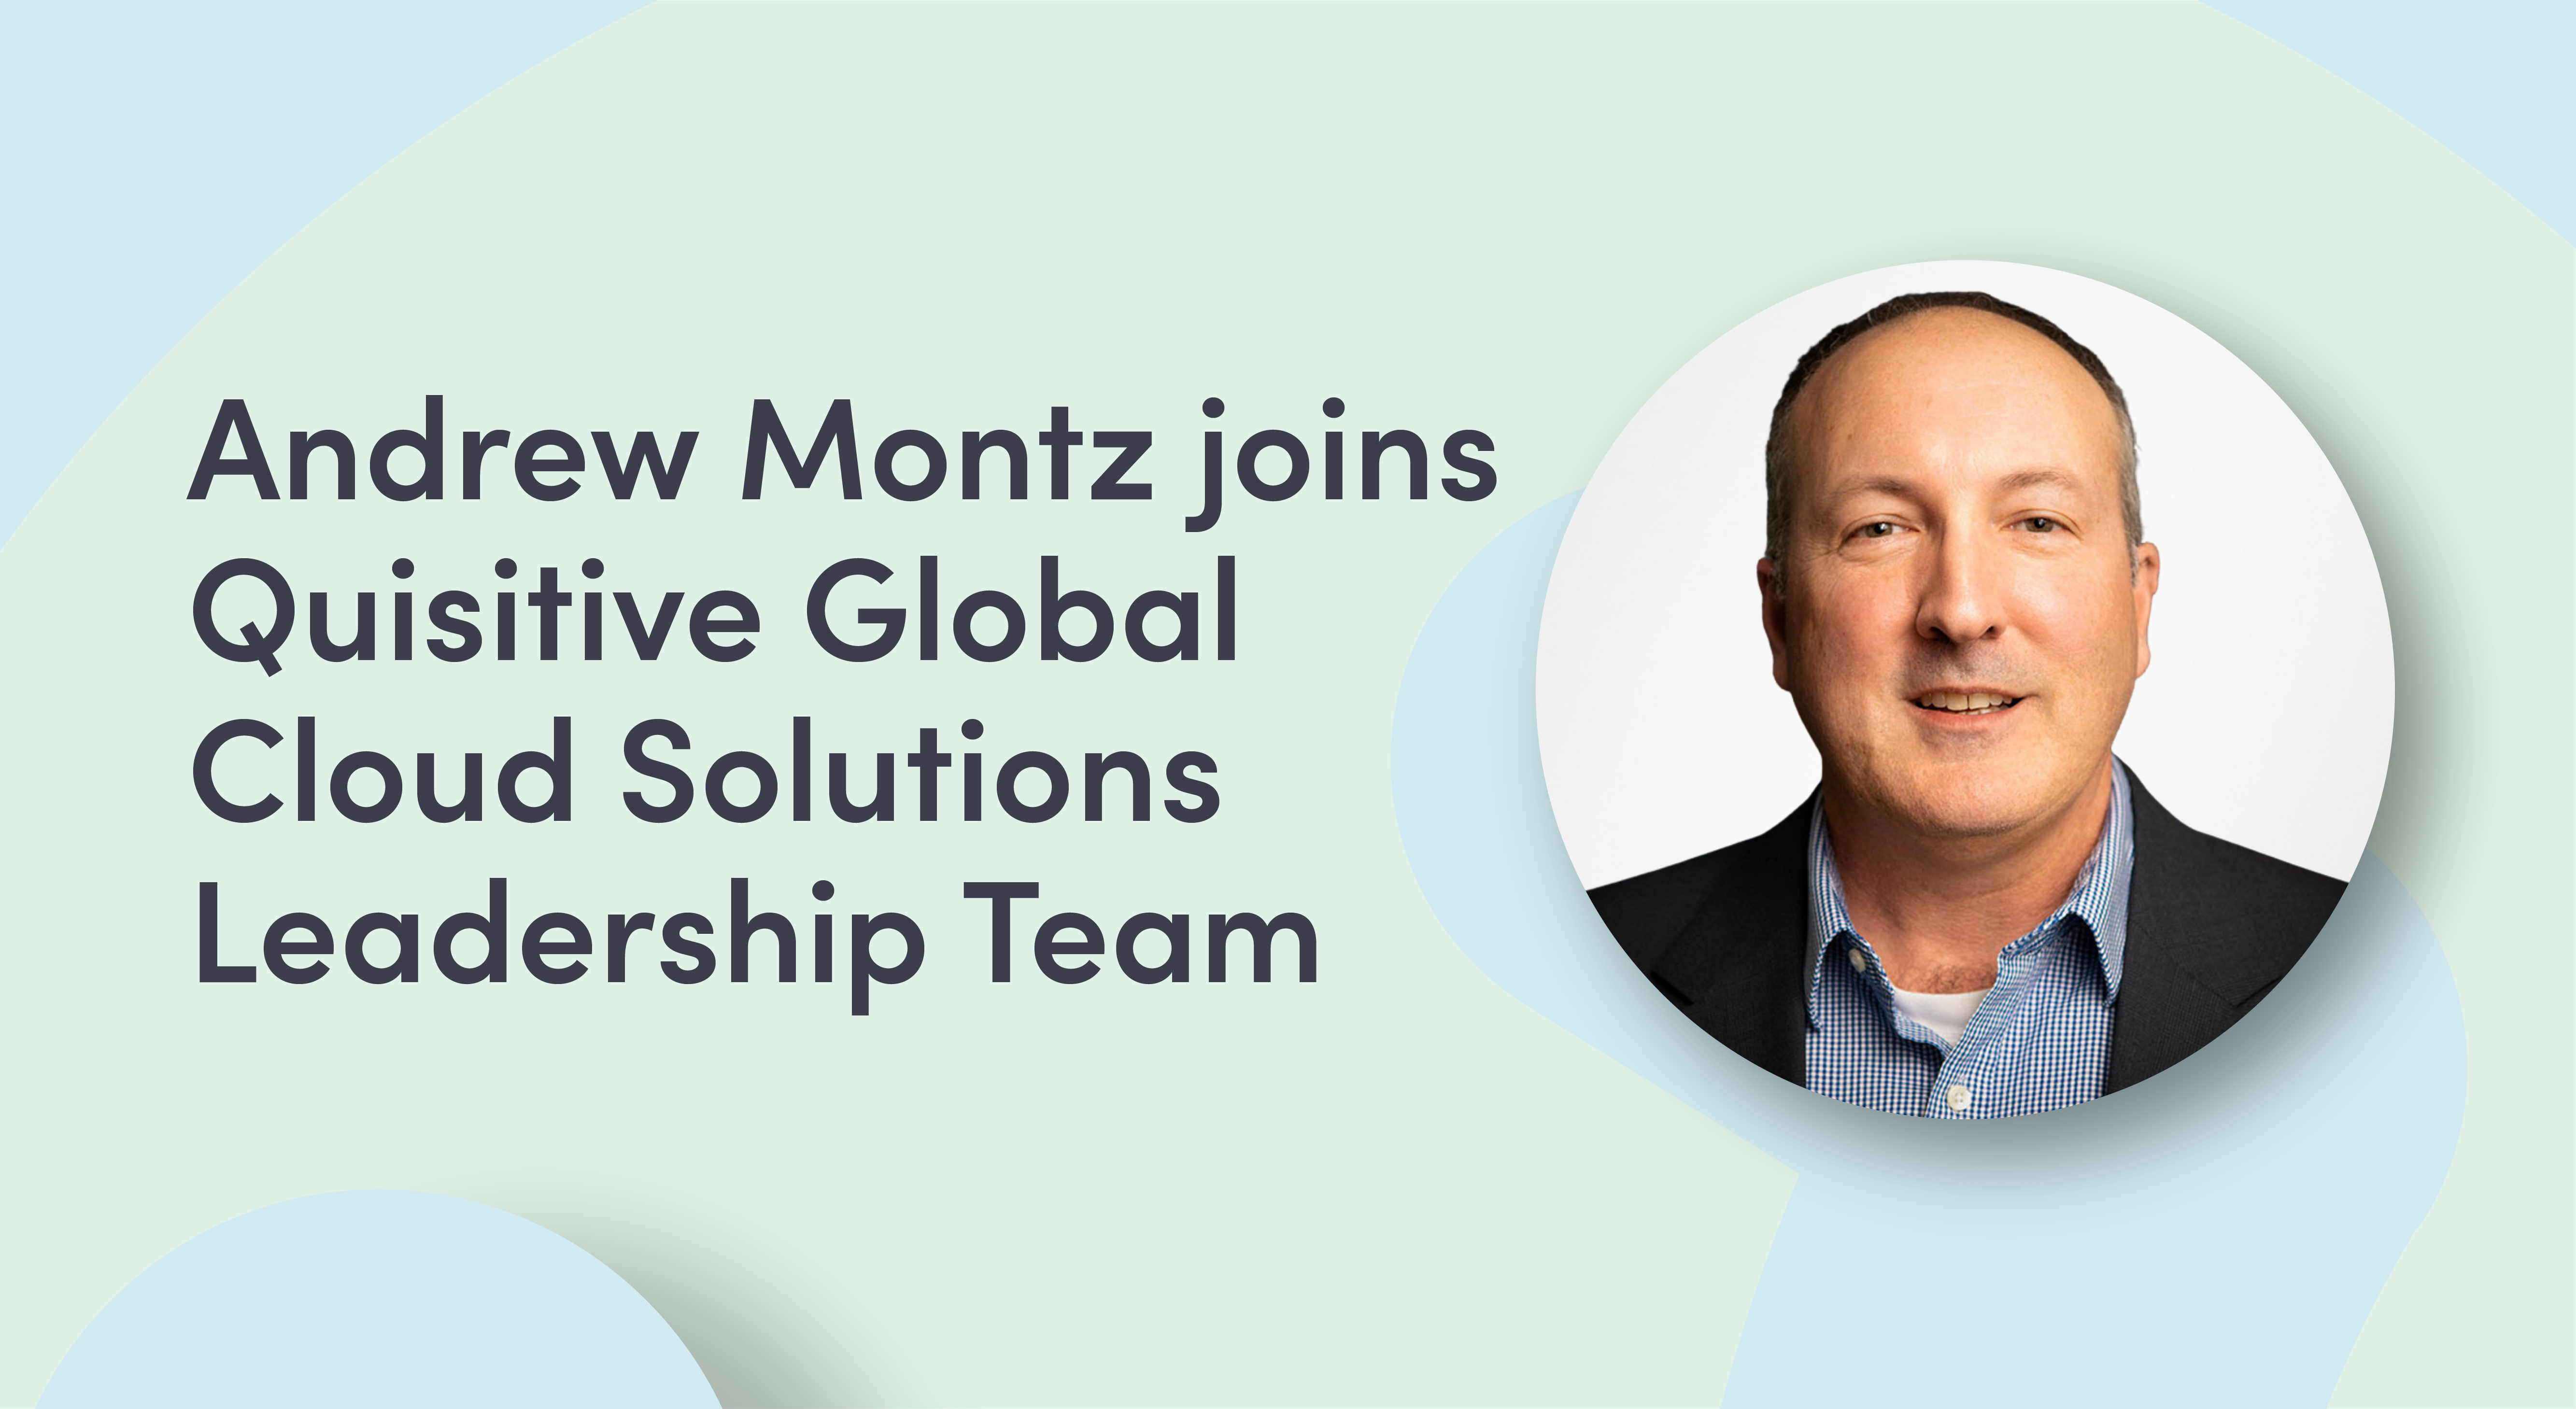 Andrew Montz joins Quisitive Global Cloud Solutions Leadership Team